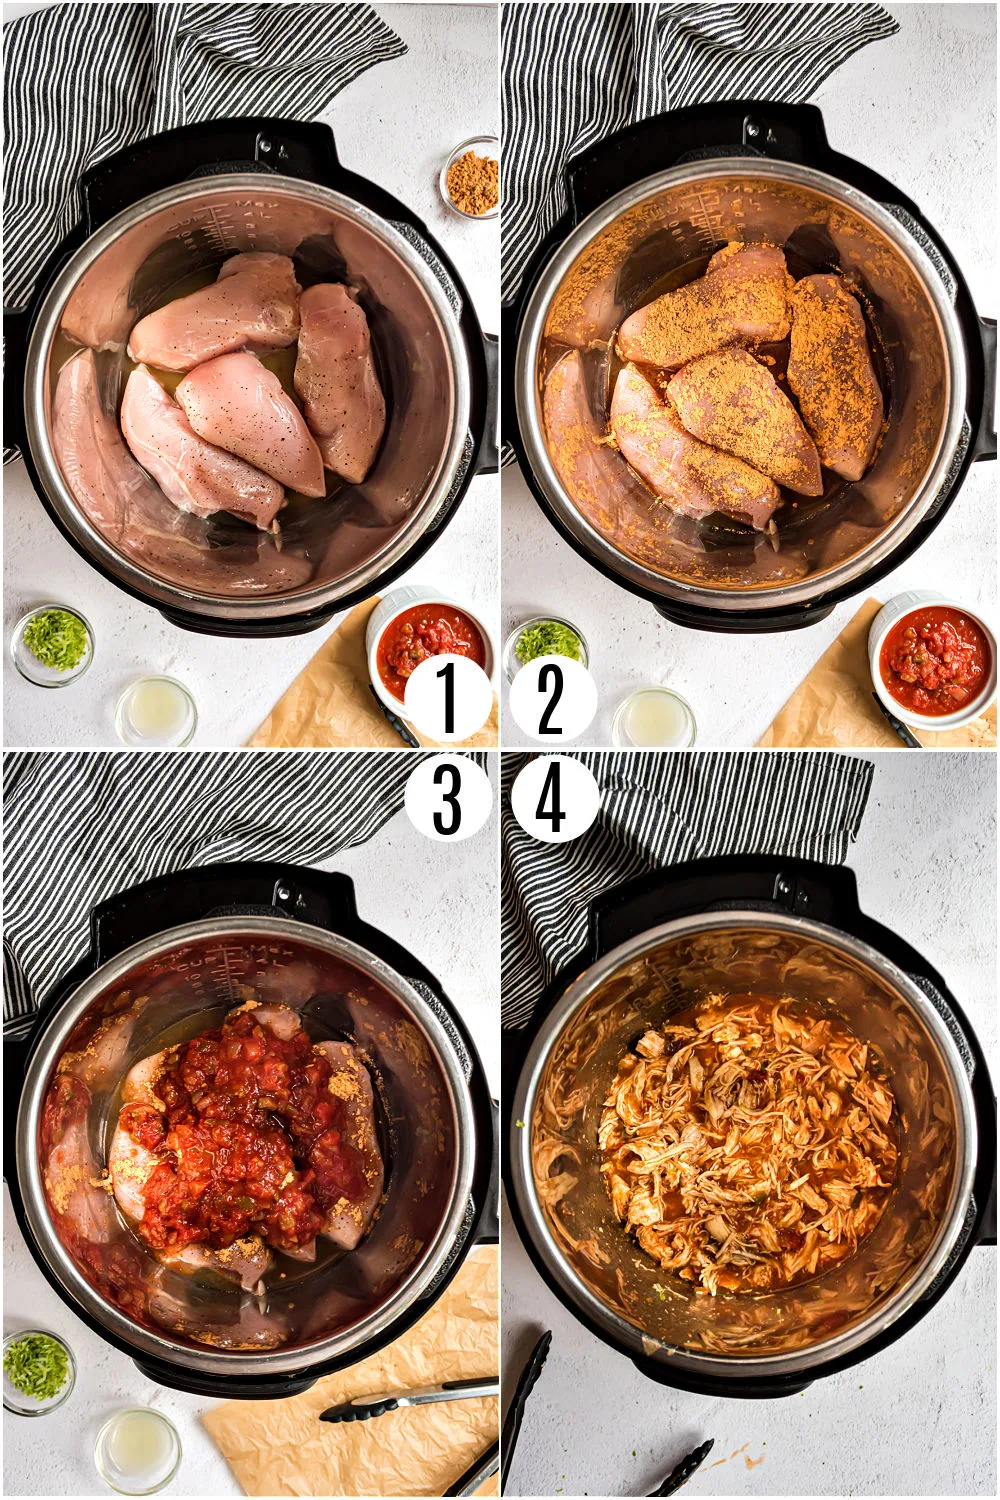 Step by step photos showing how to make chicken tacos in the instant pot.